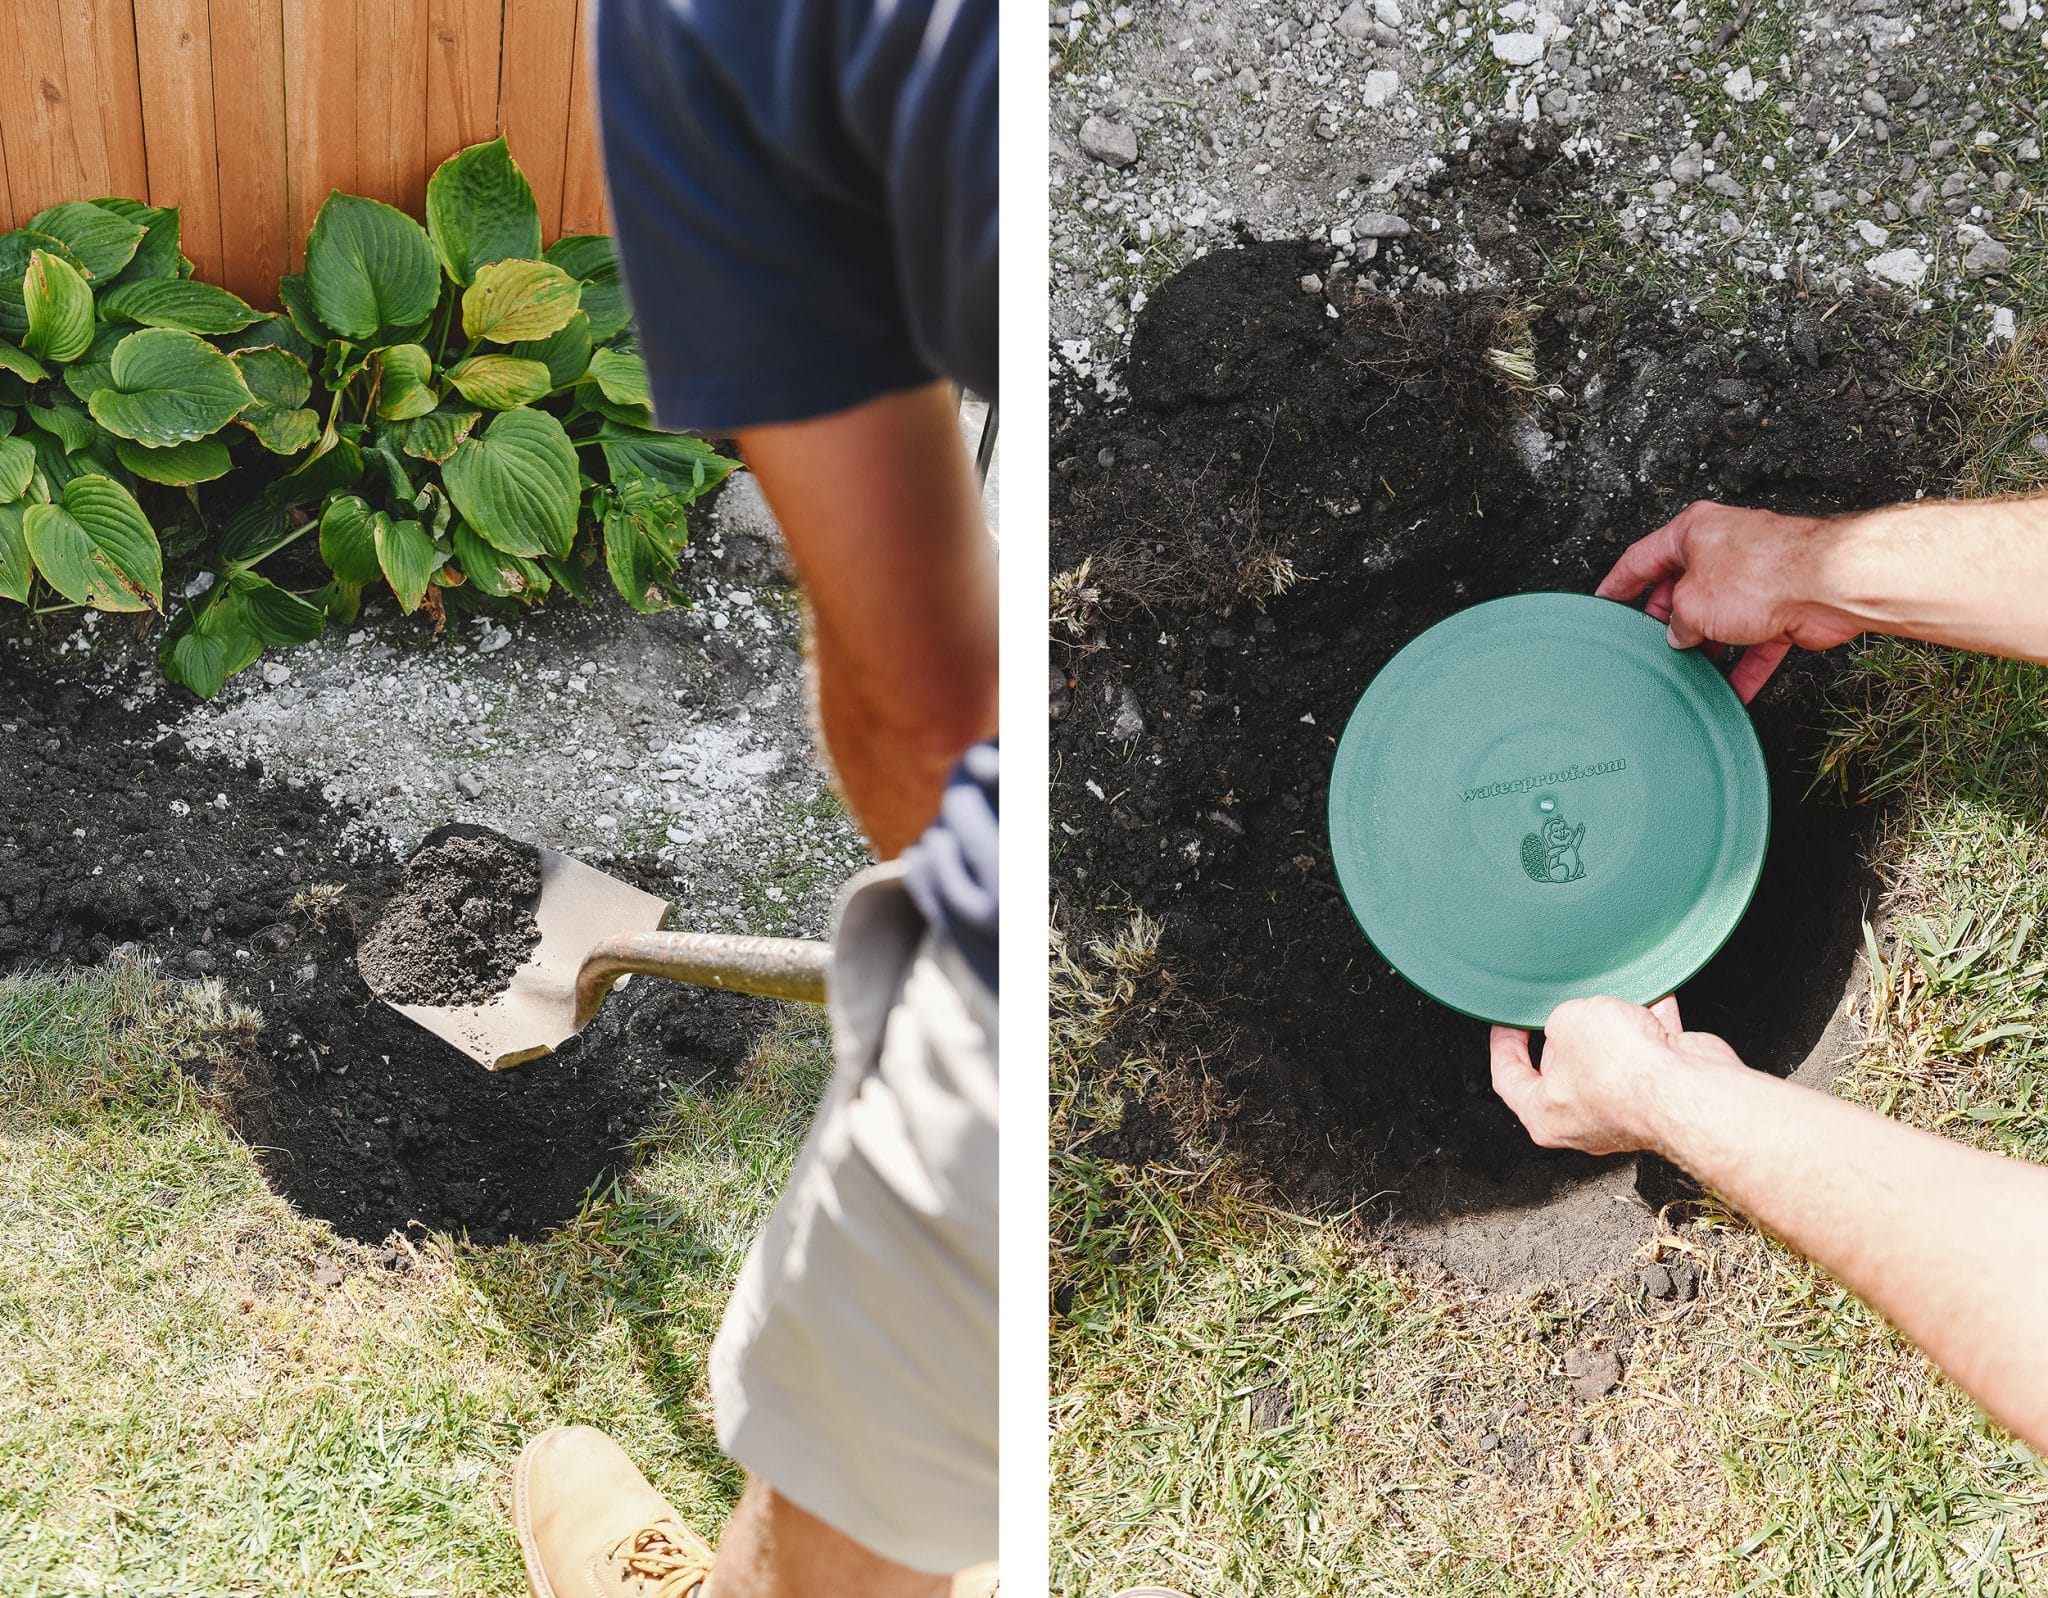 Scott digs out the trench for the PVC extension tube and places the bubbler pot in the hole. 